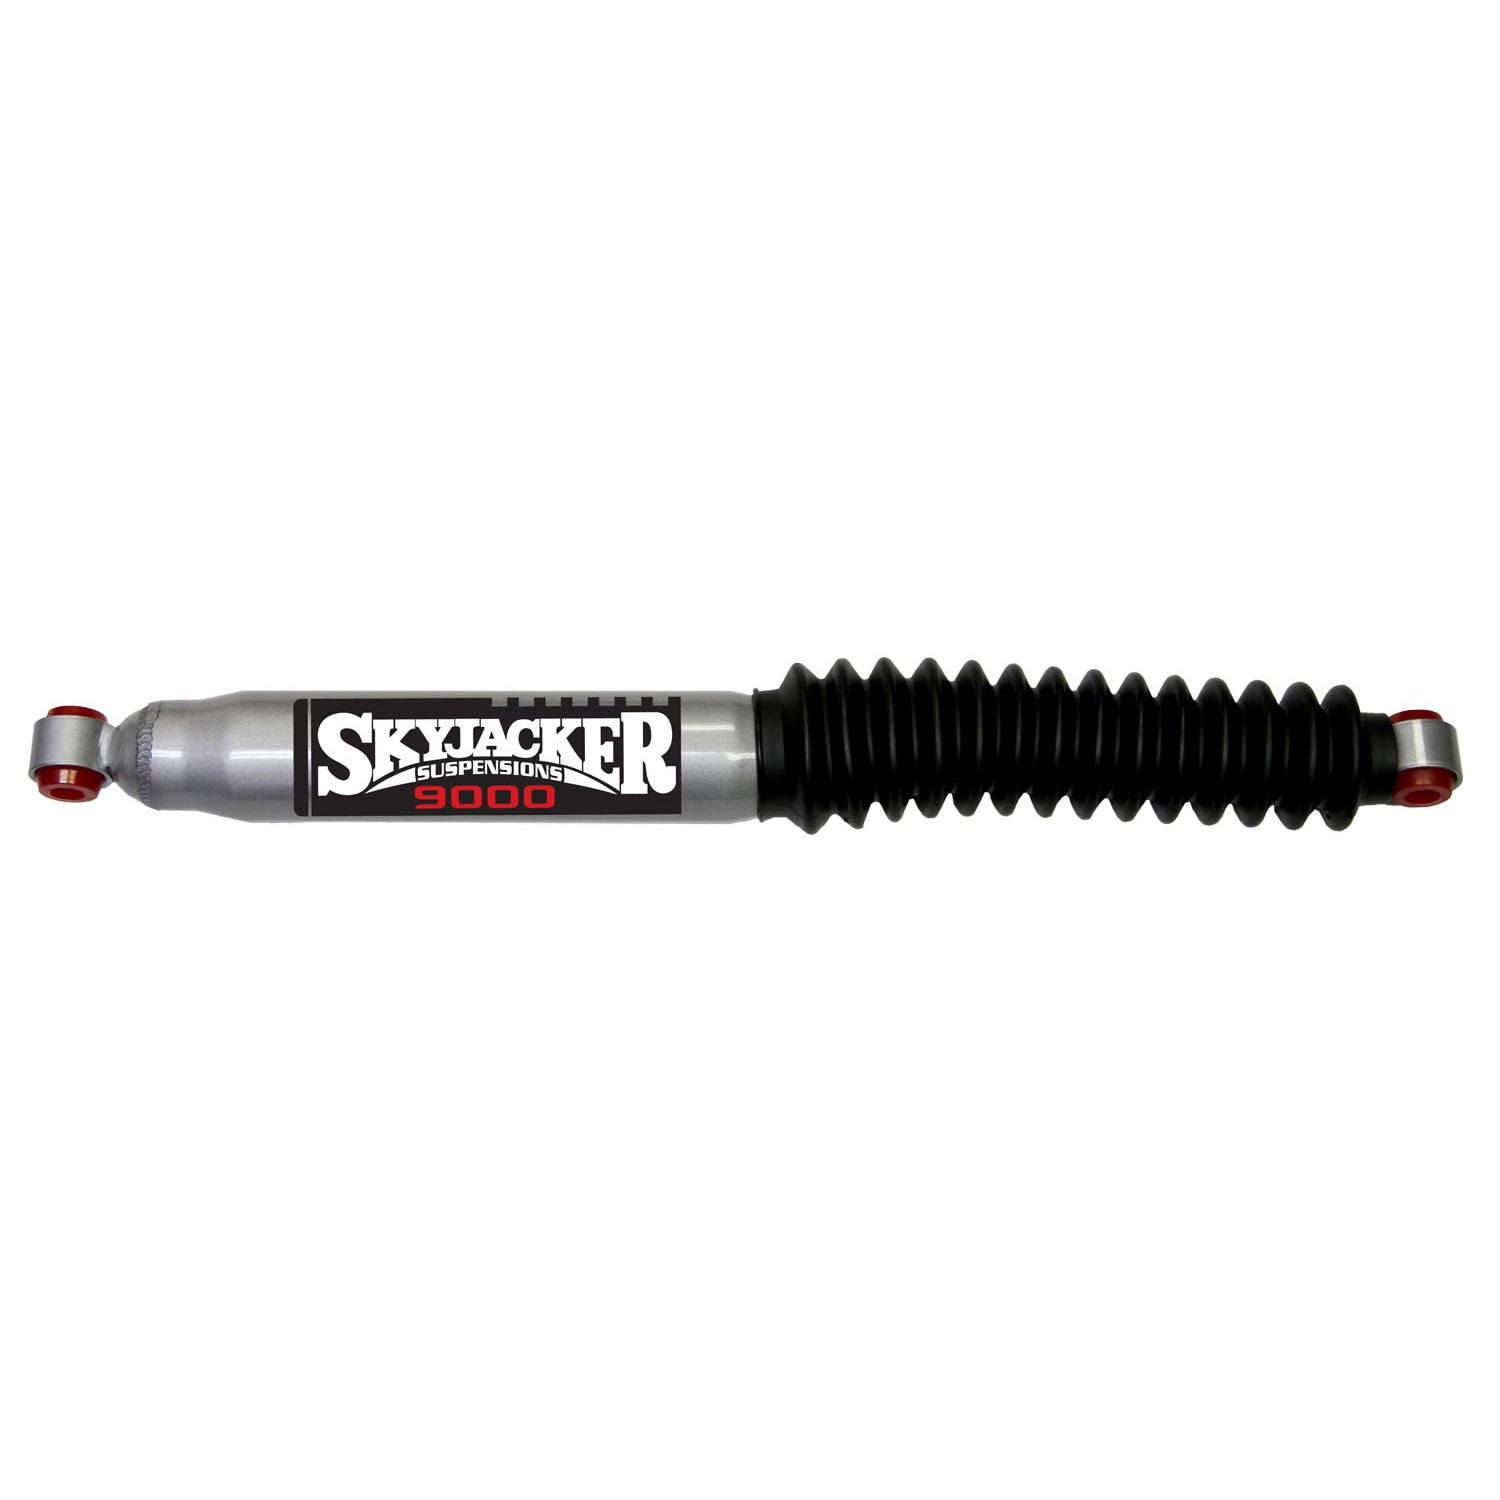 Steering Stabilizer Extended Length 23.9 Inch Collapsed Length 14.35 Inch Silver w/Black Boot Replacement Cylinder Only No Hardware Included Skyjacker